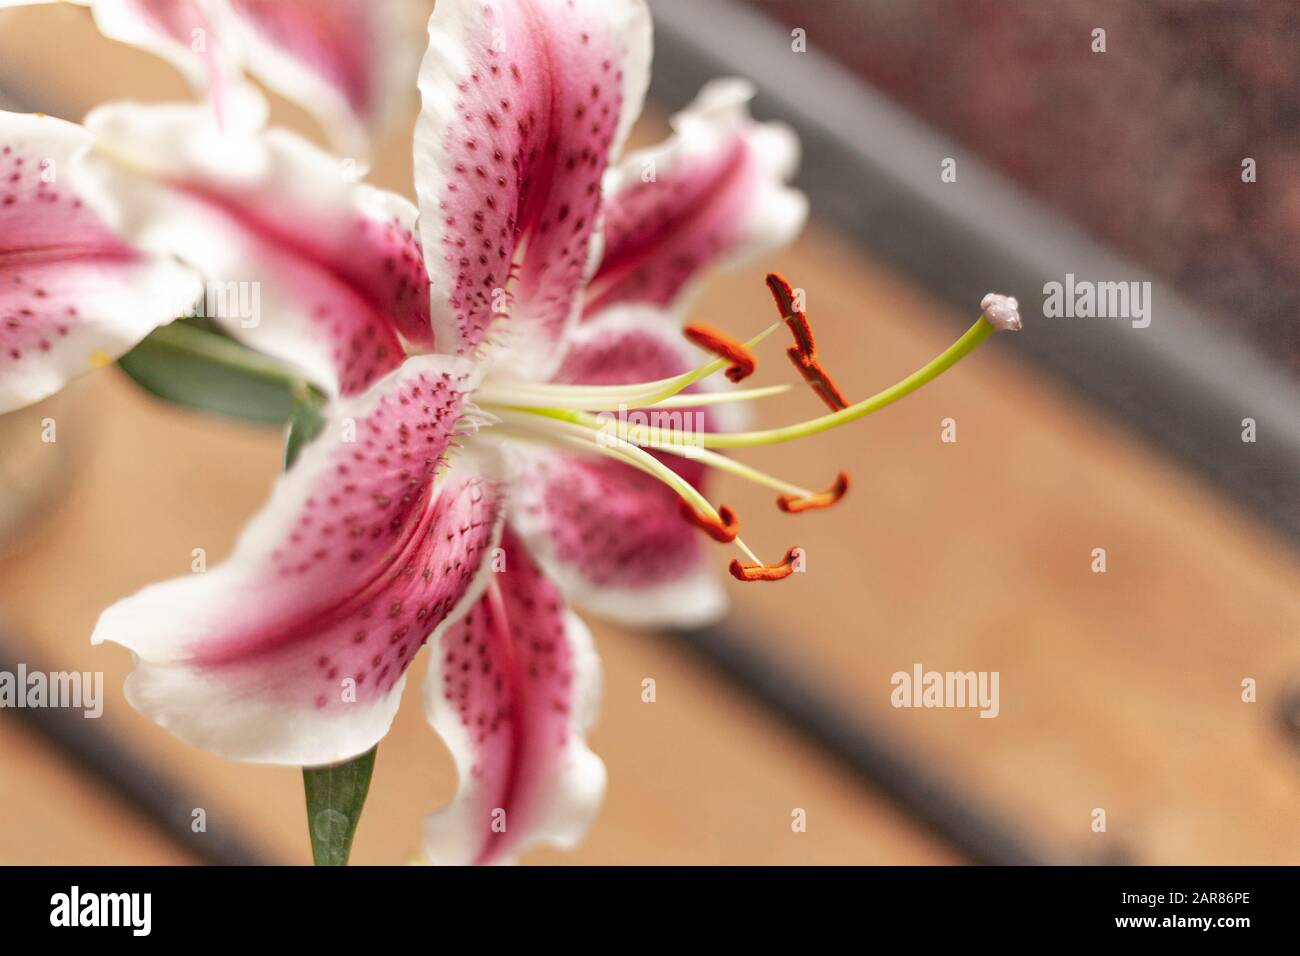 A bouquet of Stargazer lilies with deep pink and white petals and orange pollen on the stamen. Stock Photo